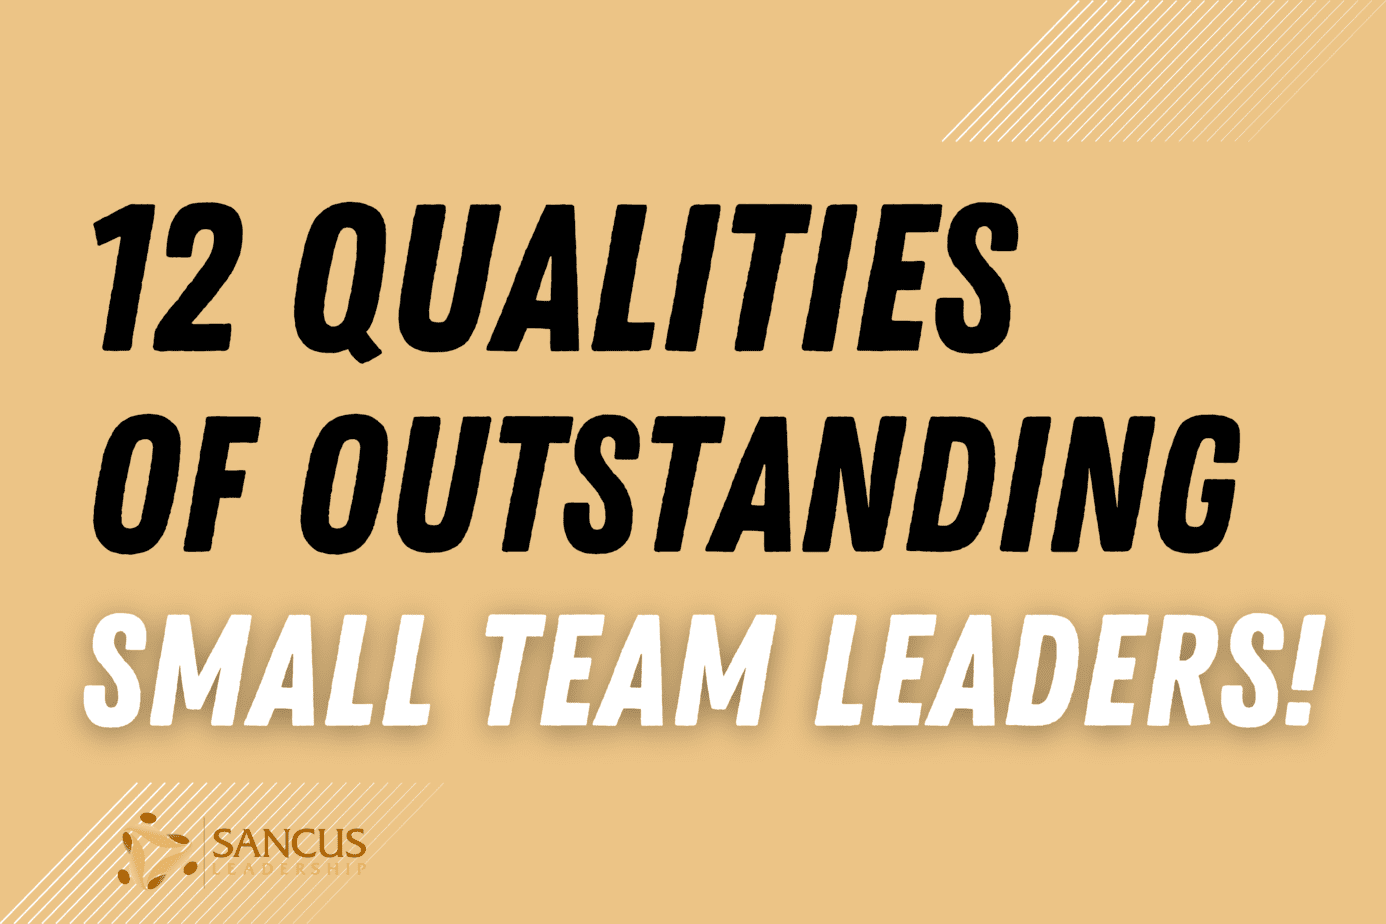 12 Shared Qualities of Outstanding Small Team Leaders!